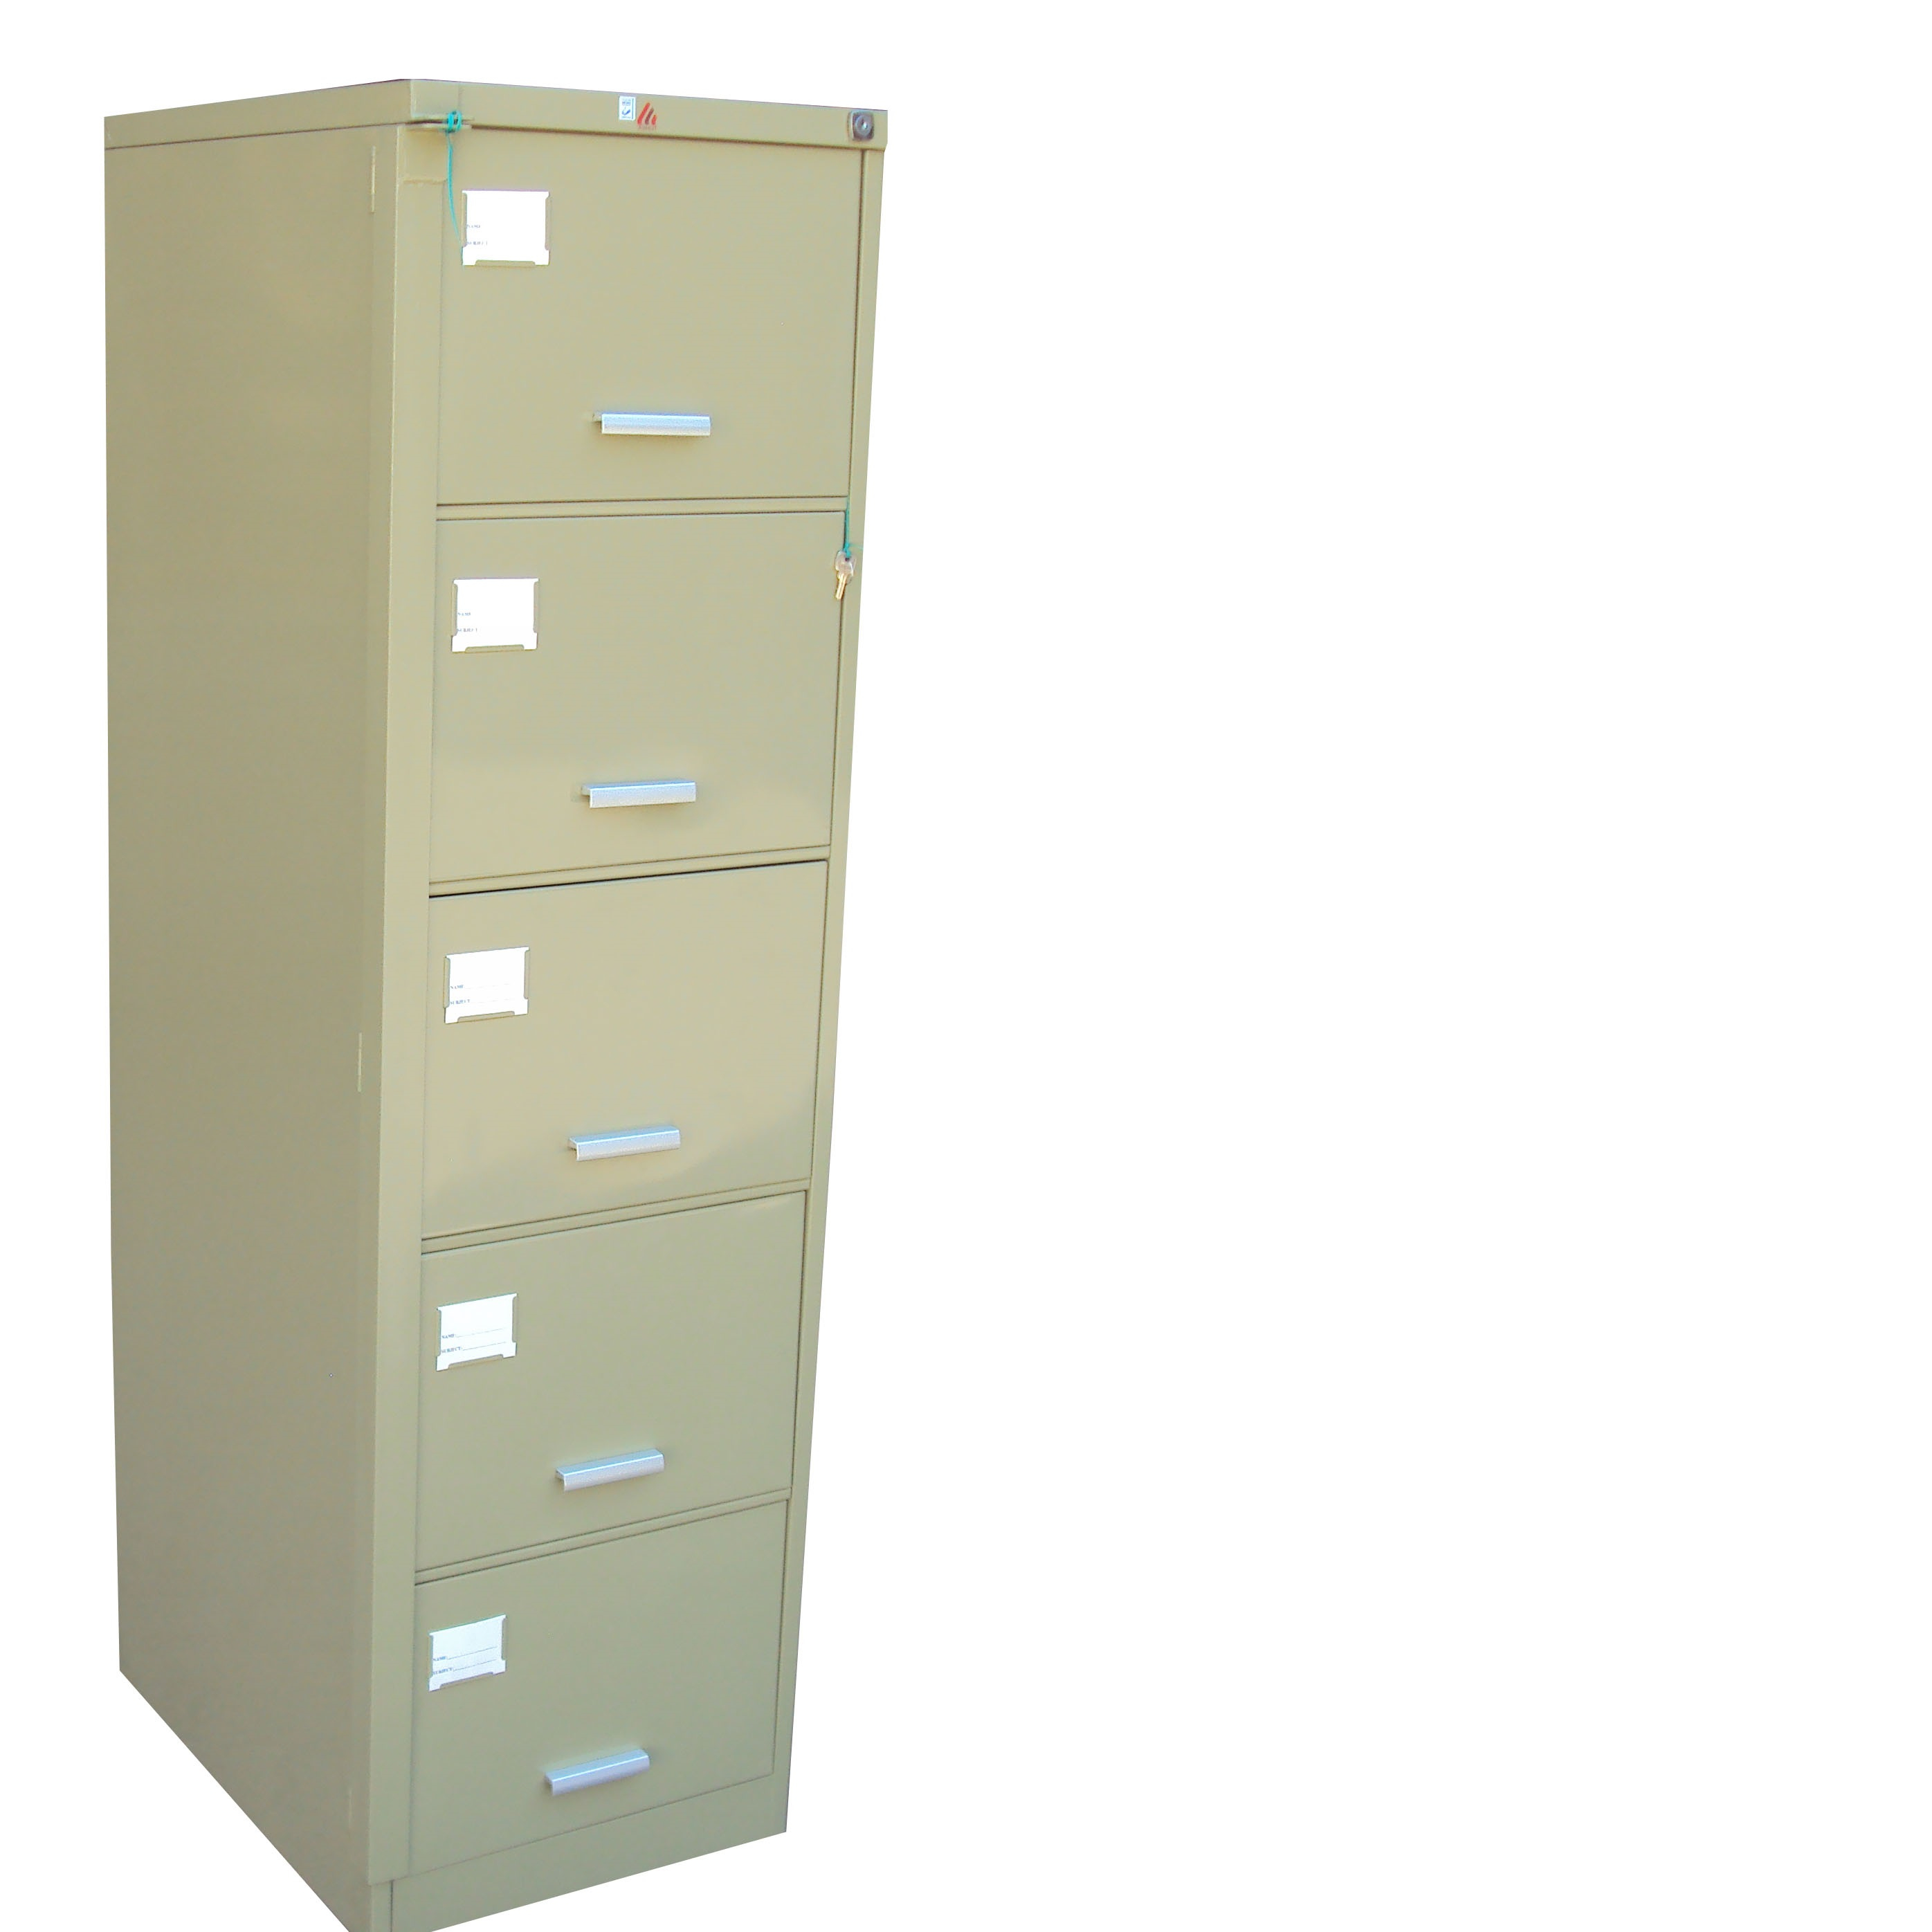 5 Drawer Filing Cabinet Ashut Engineers Limited inside proportions 2792 X 2792